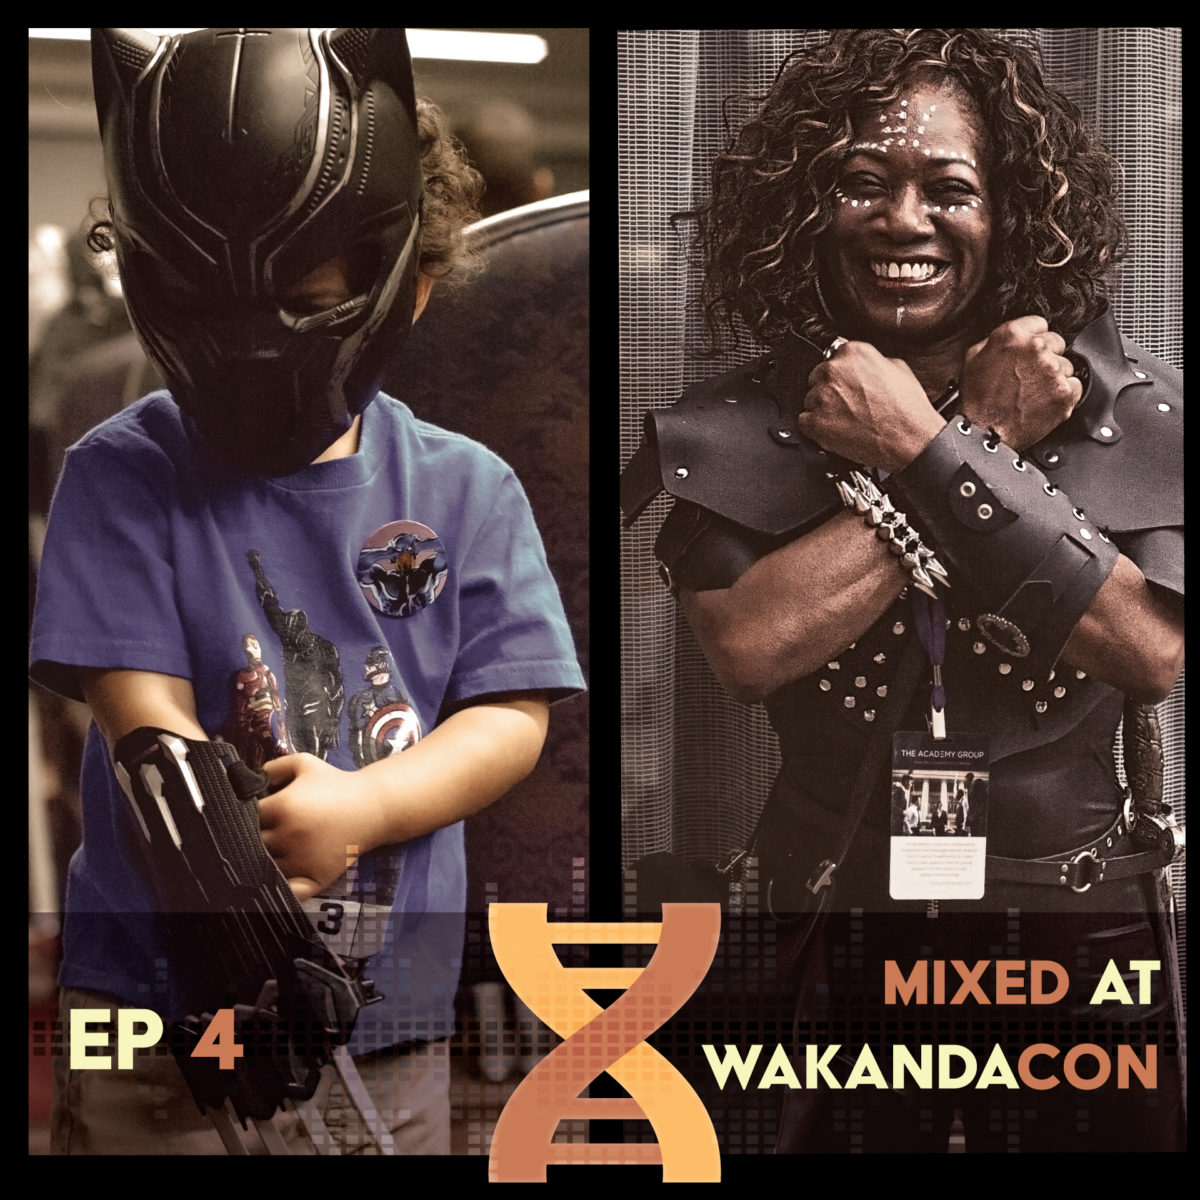 Image of a small child in a T'Challa mask, and a woman dressed in cosplay armor.